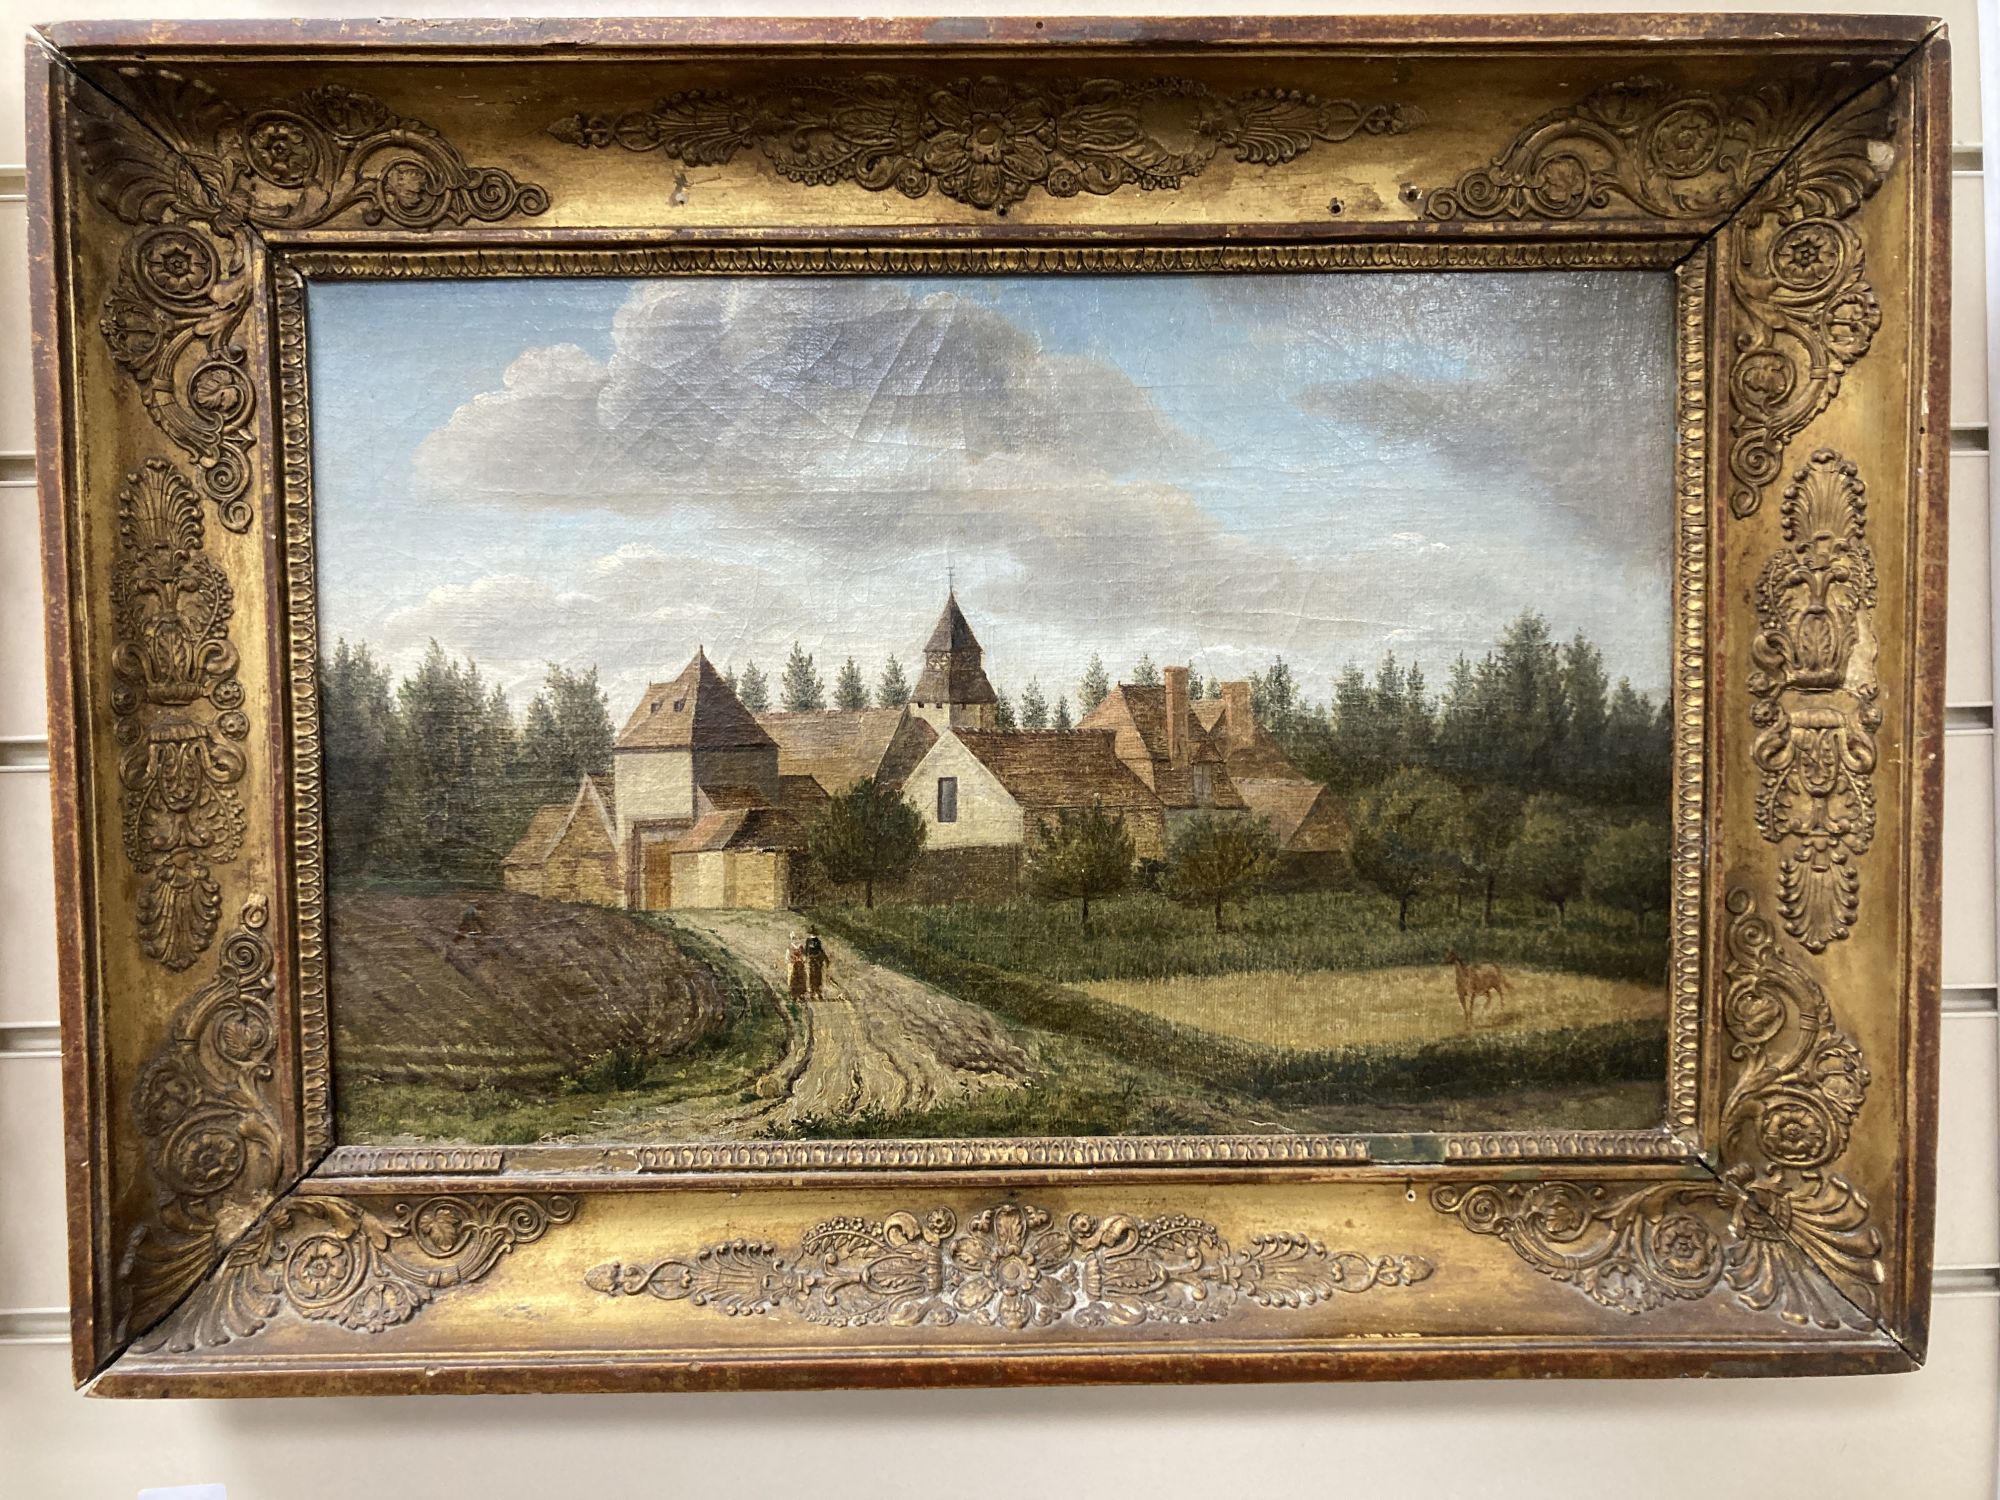 19th century Continental School, oil on canvas, View of a village with figures and a horse in the foreground, 29 x 45cm